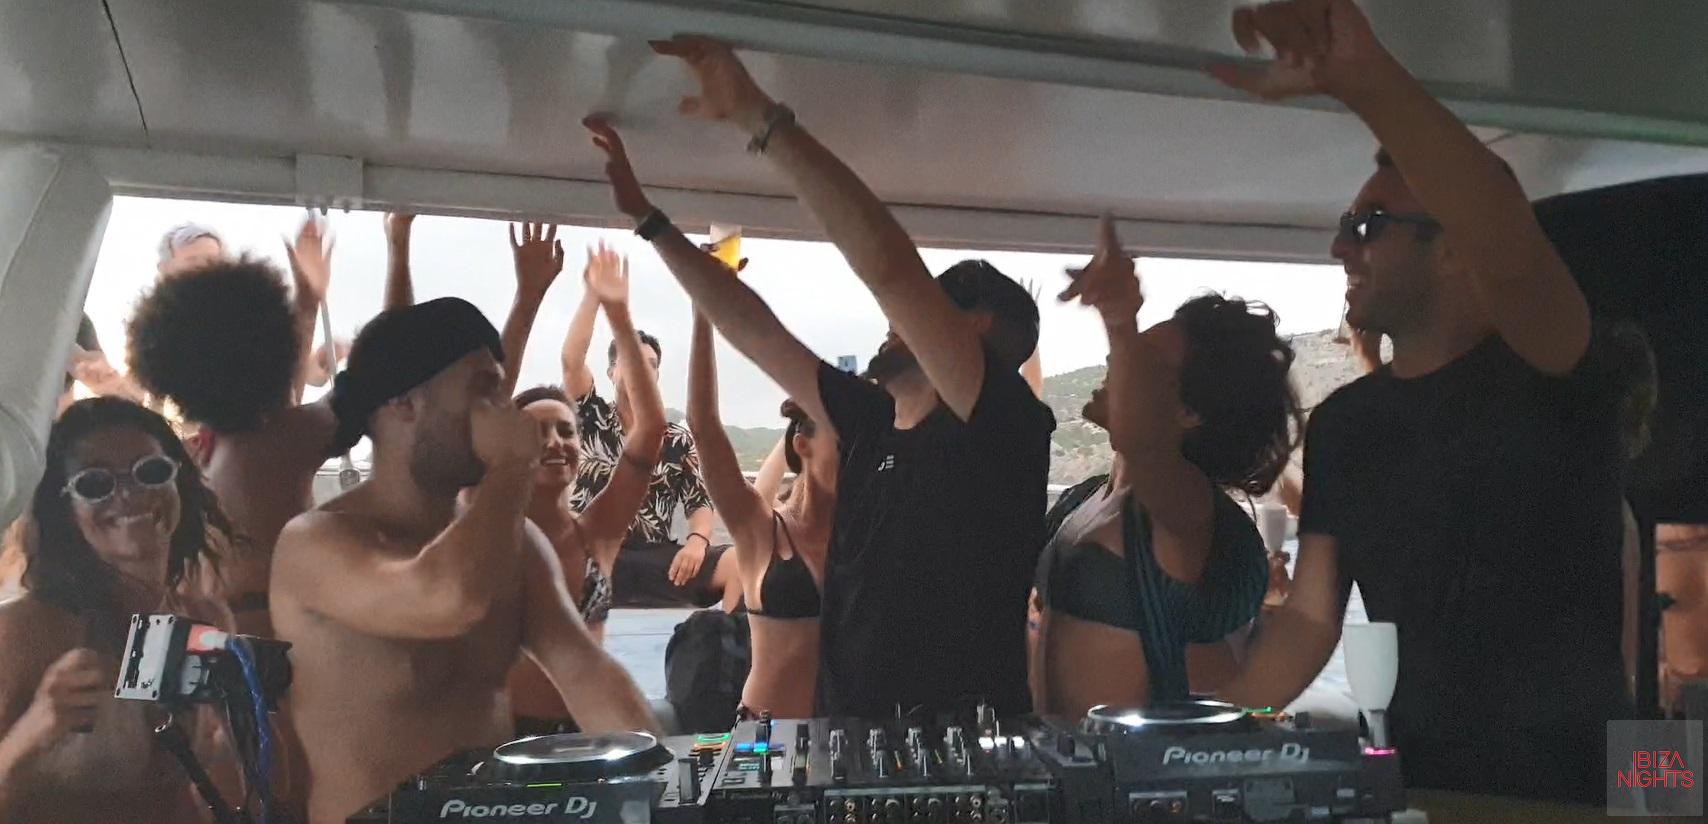 Hands up during one of the tracks of the Italian dj Marco Faraone.